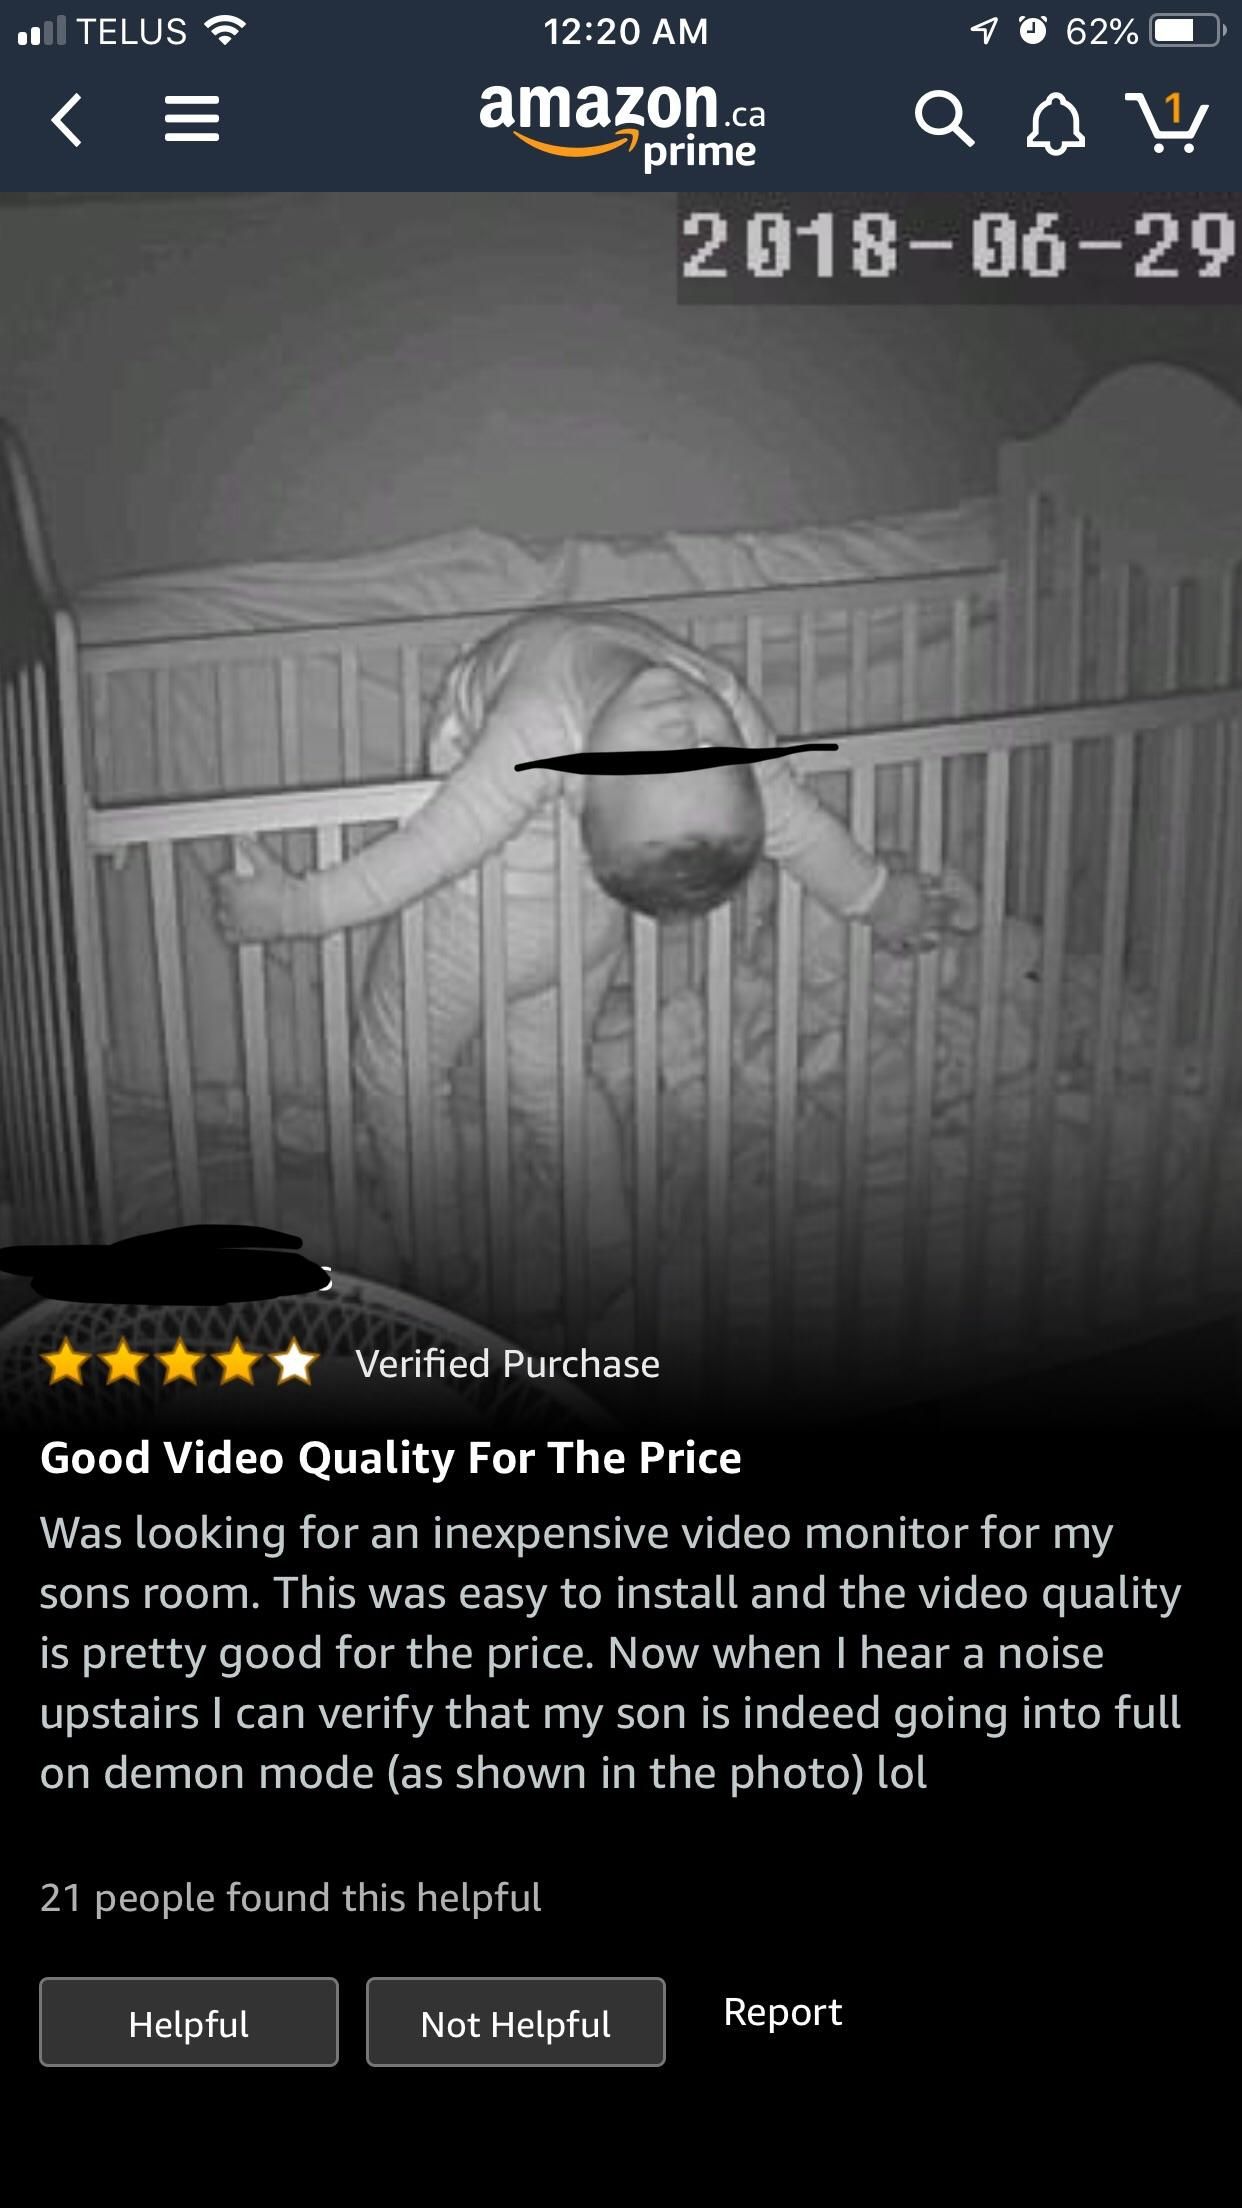 Found this gem of a review while looking for pet cams